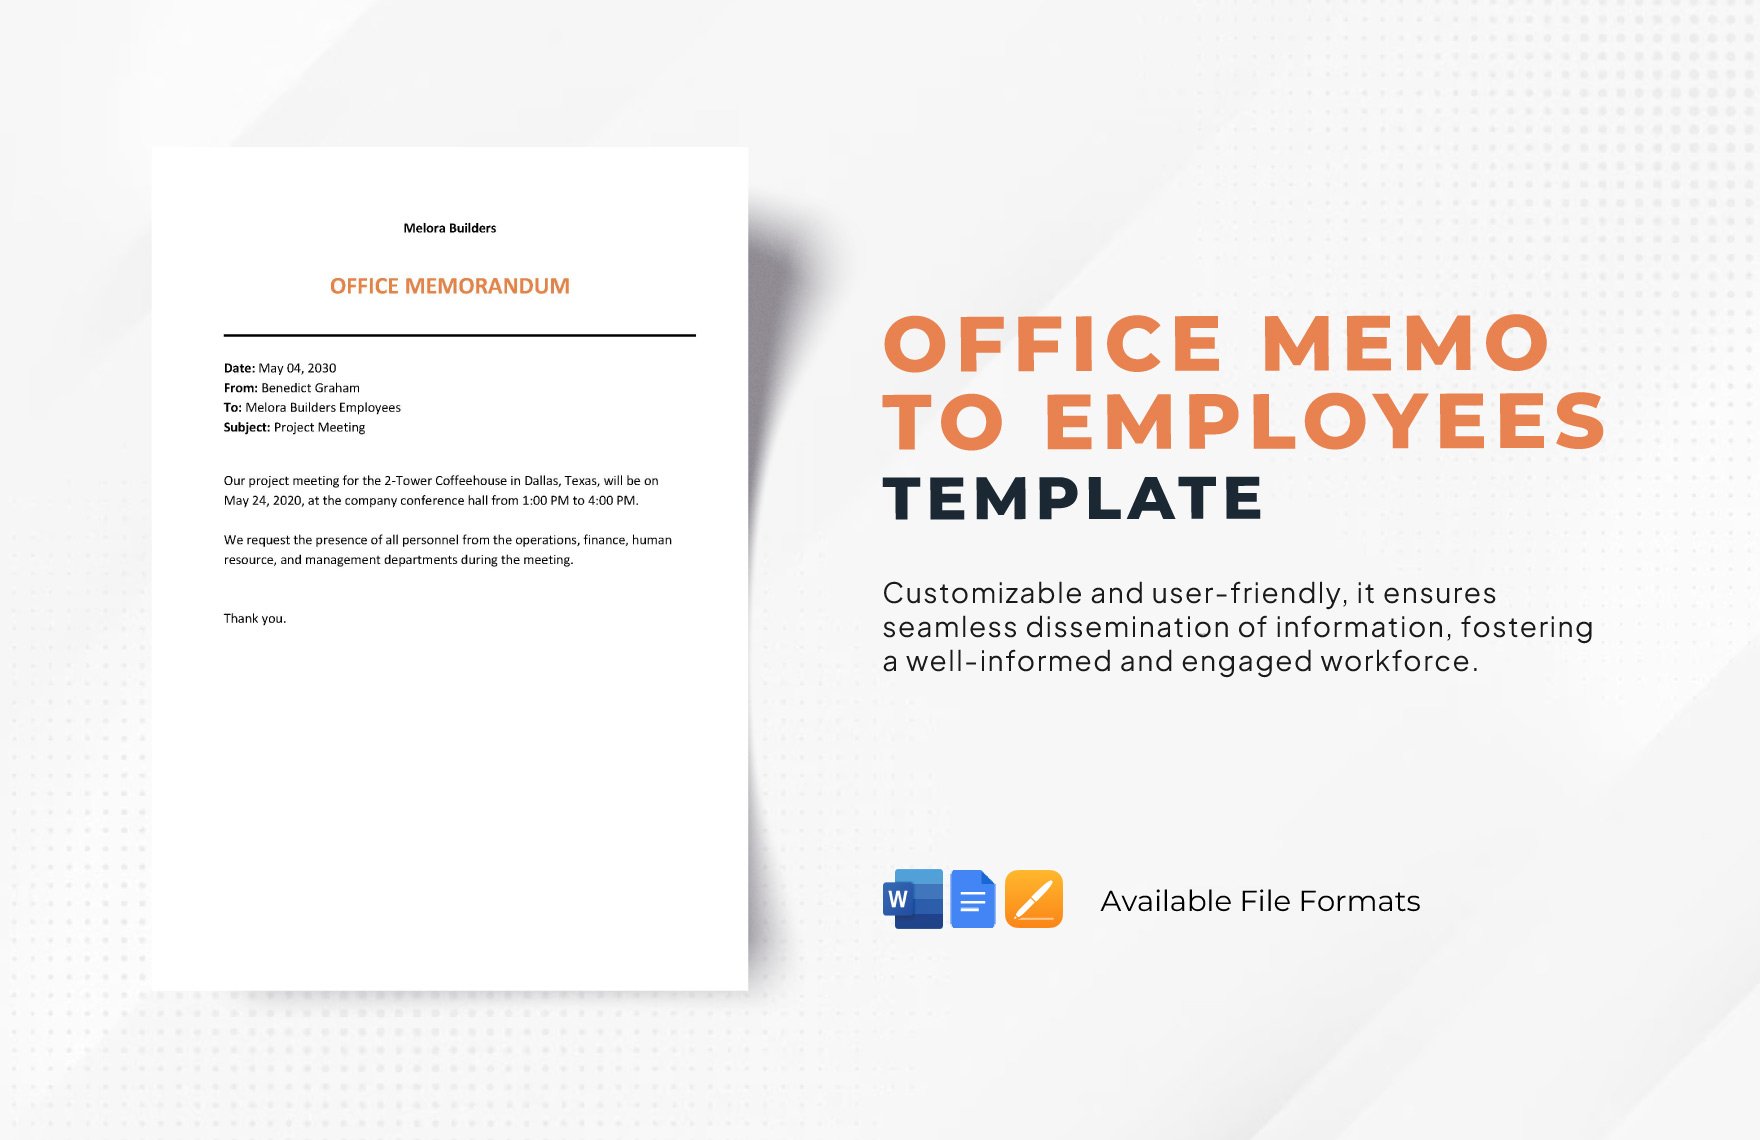 Office Memo to Employees Template